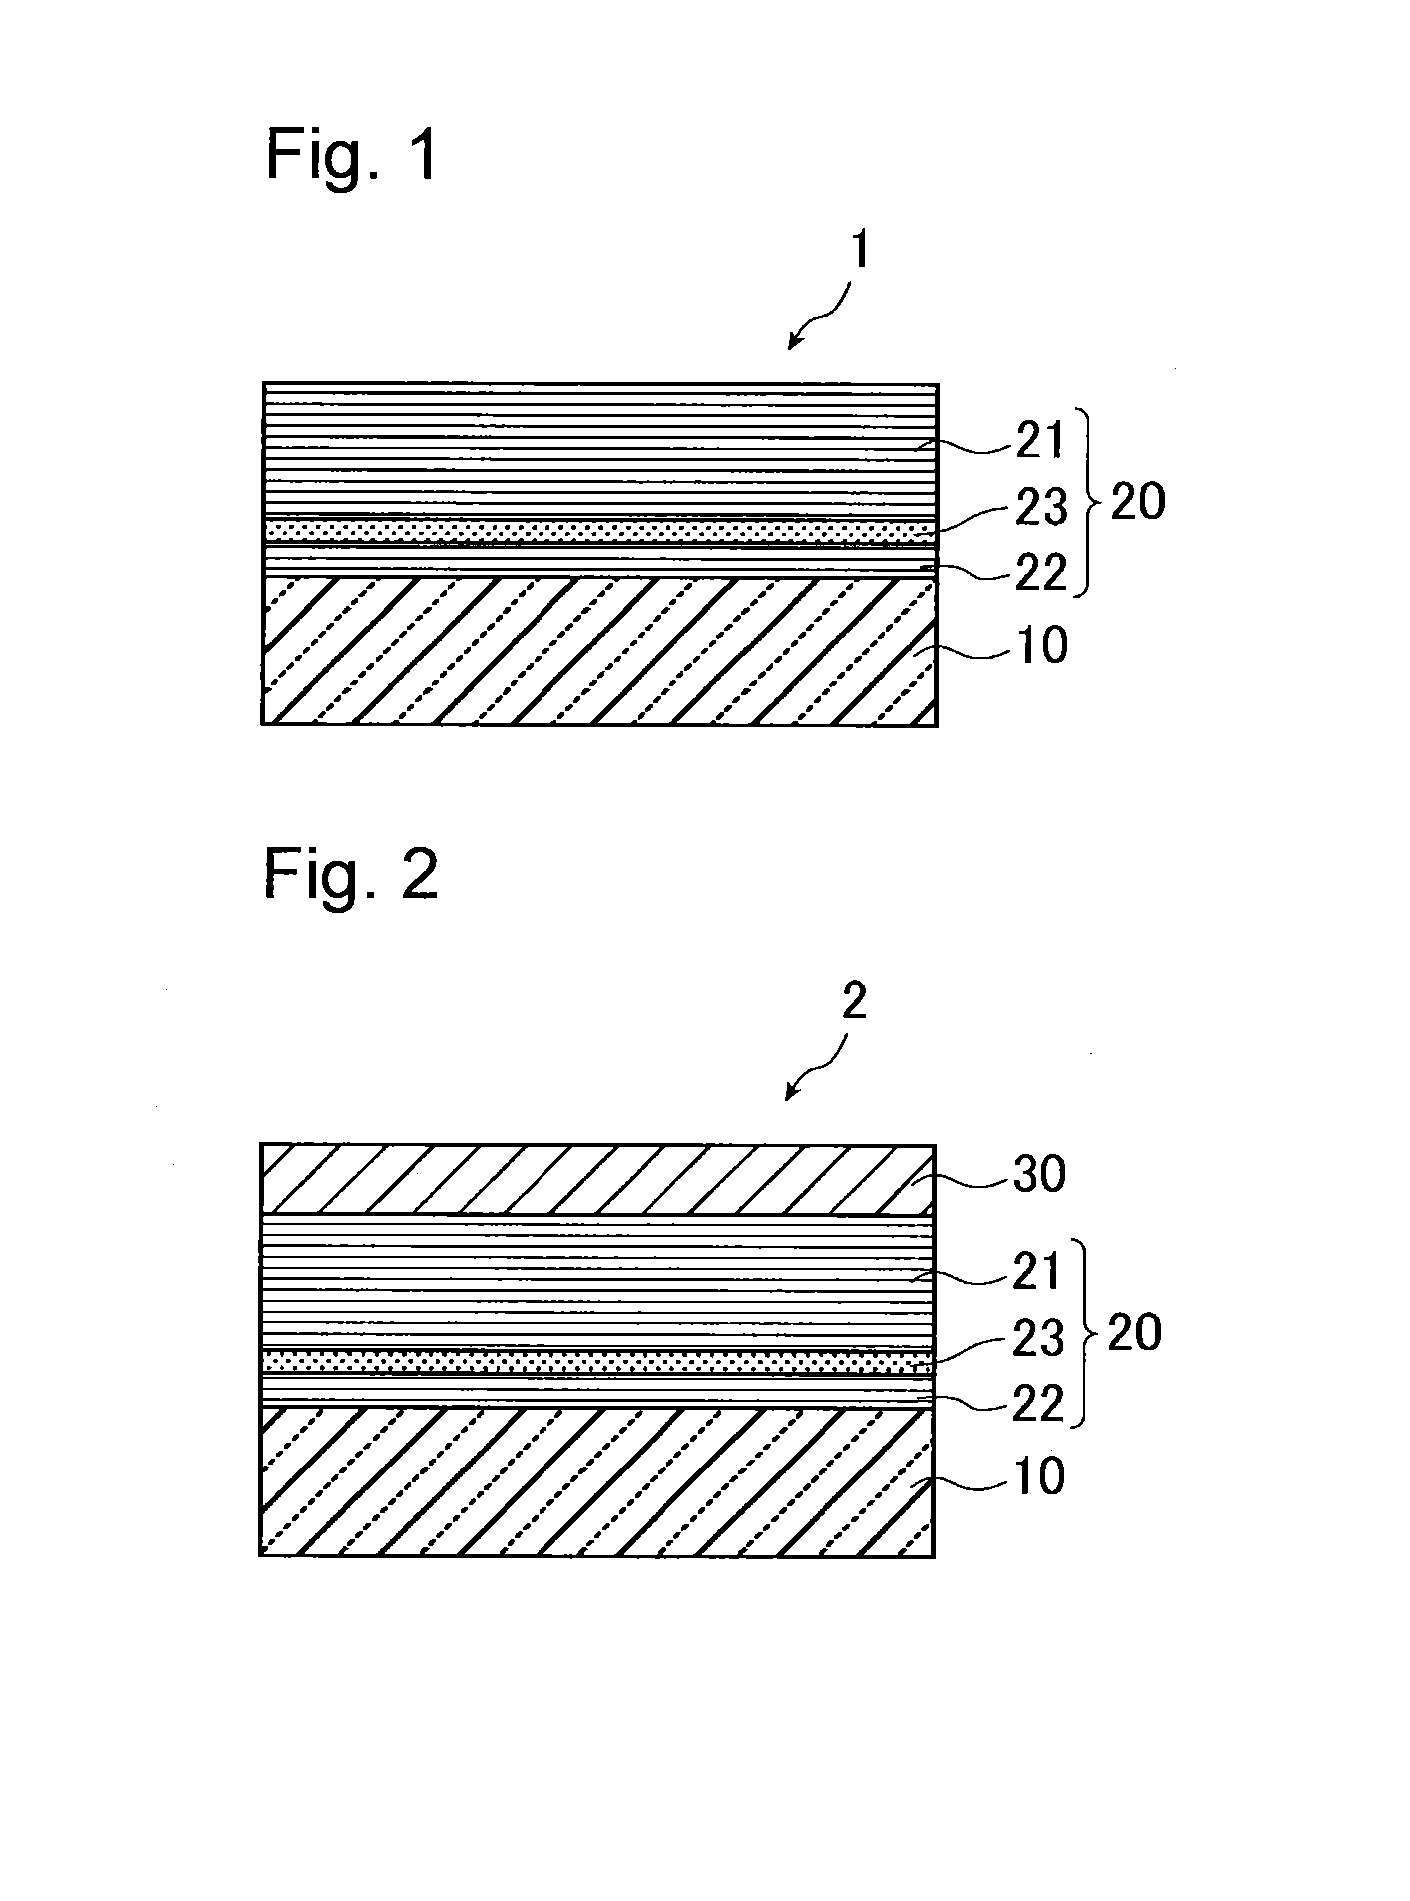 Reflective mask blank for EUV lithography, and reflective layer-coated substrate for EUV lithography